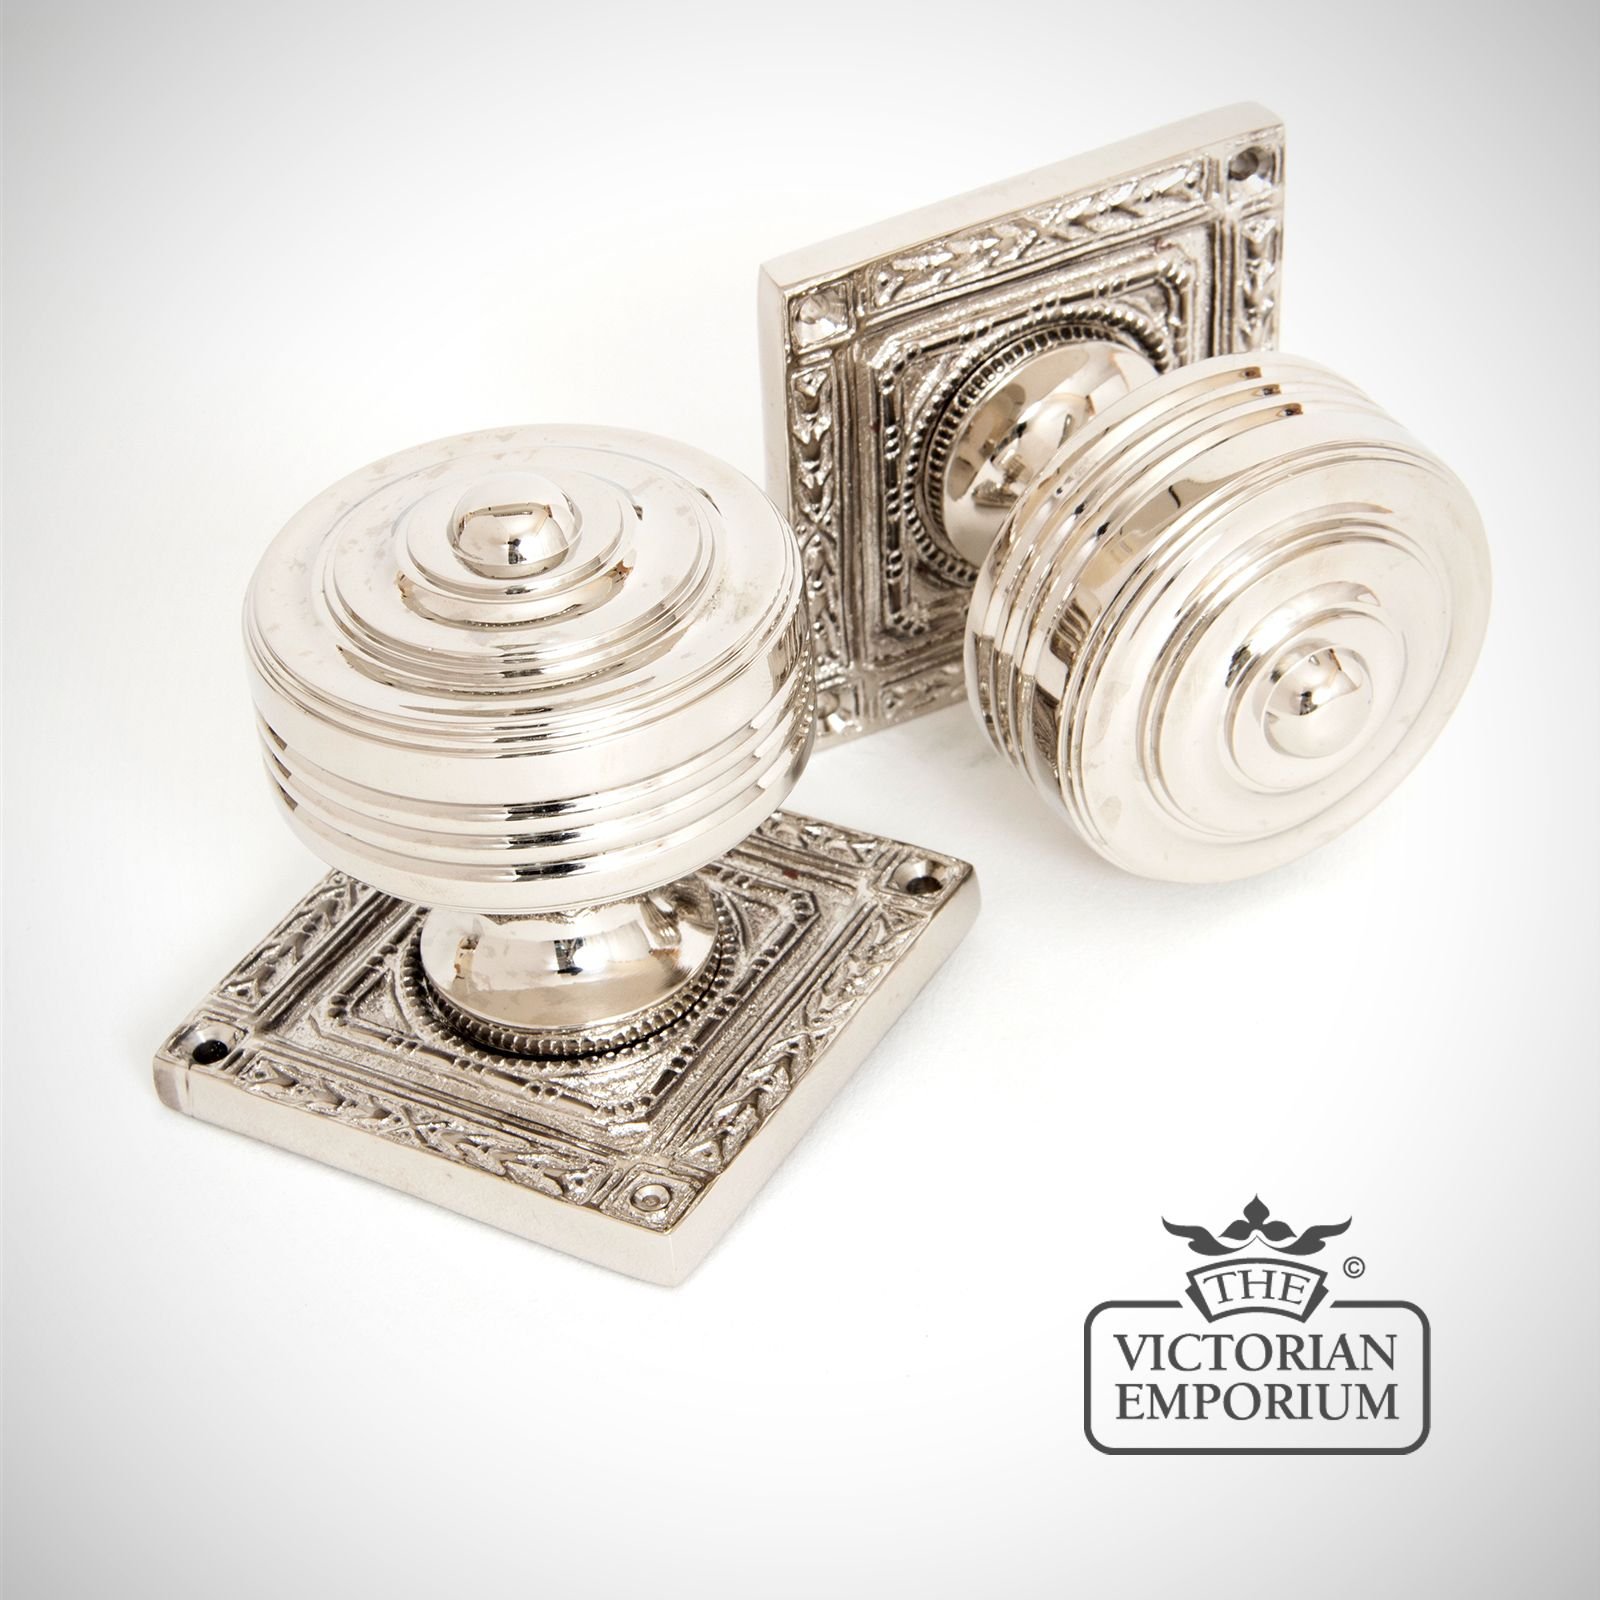 Square Highly Decorative Mortice Knob Set in Polished Nickel